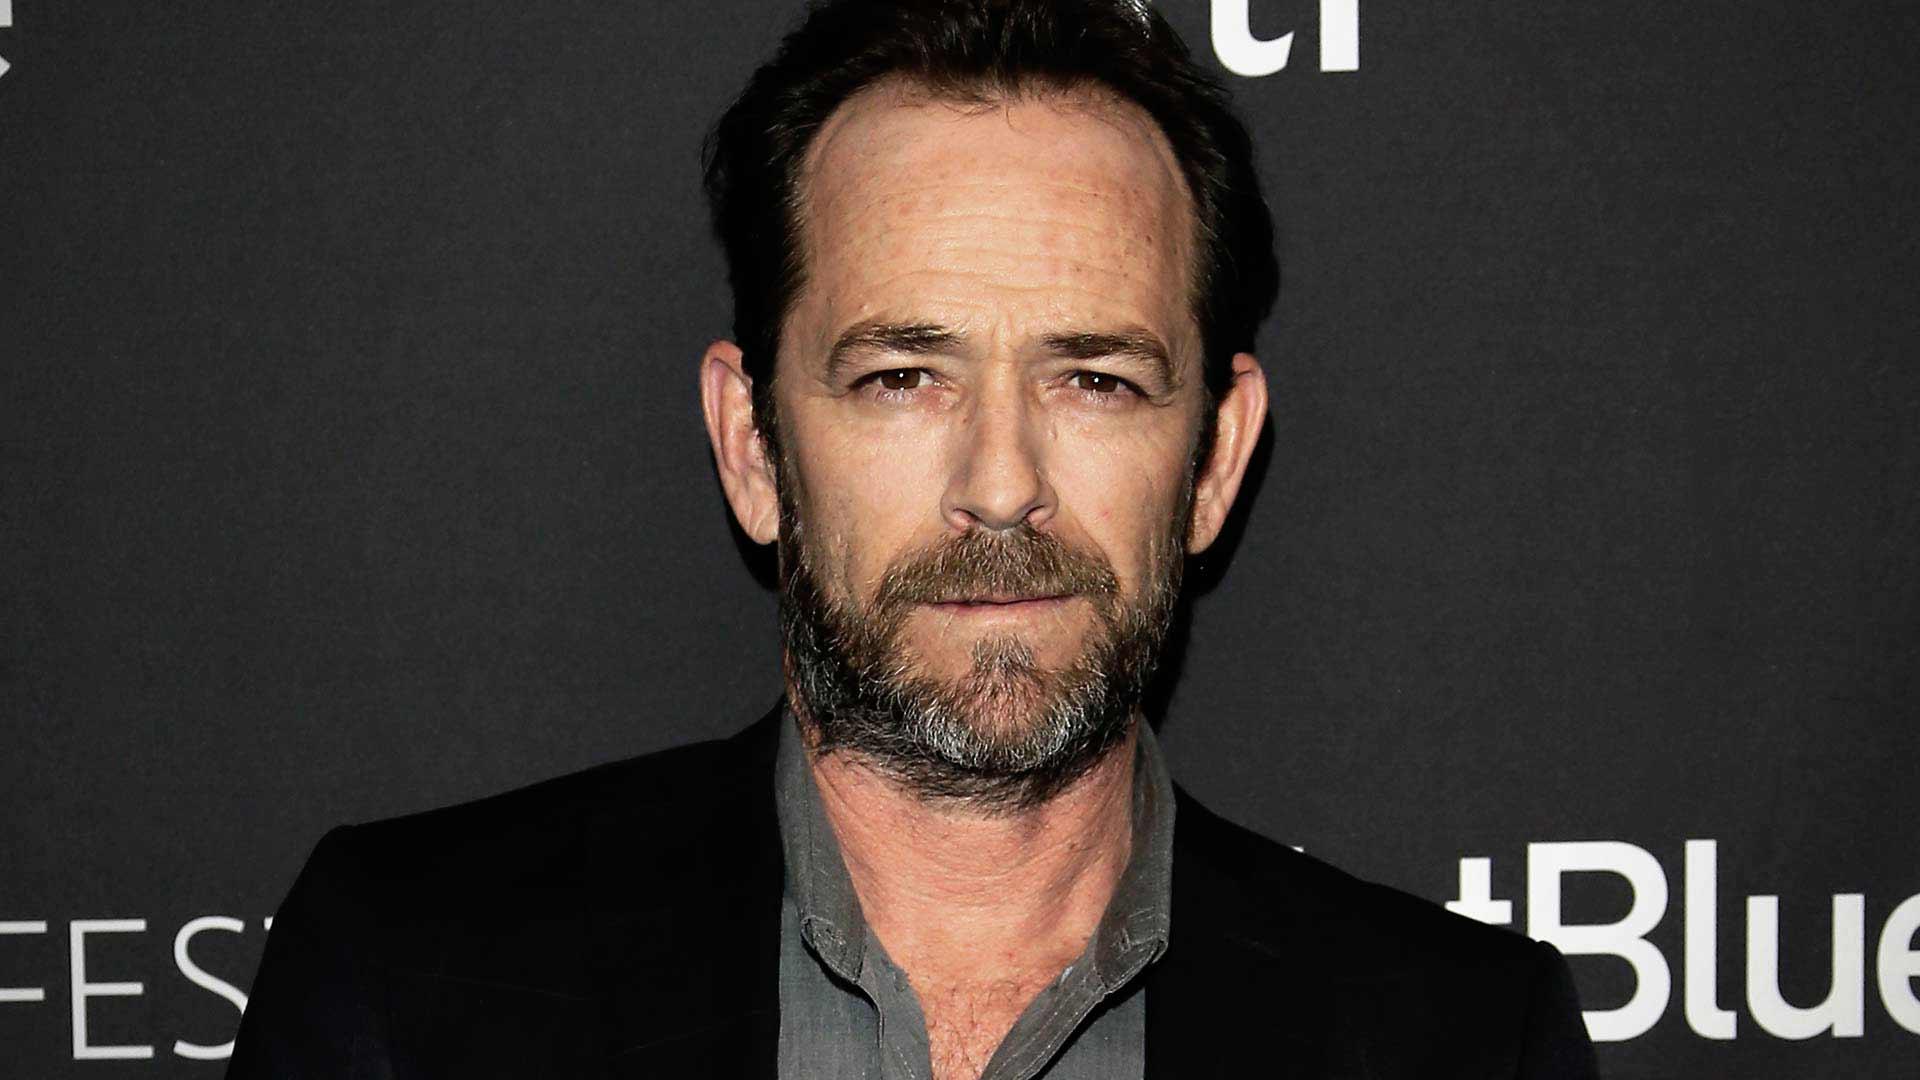 Luke Perry Dead at 52 After Stroke and Hospitalization, Surrounded by Family at Death